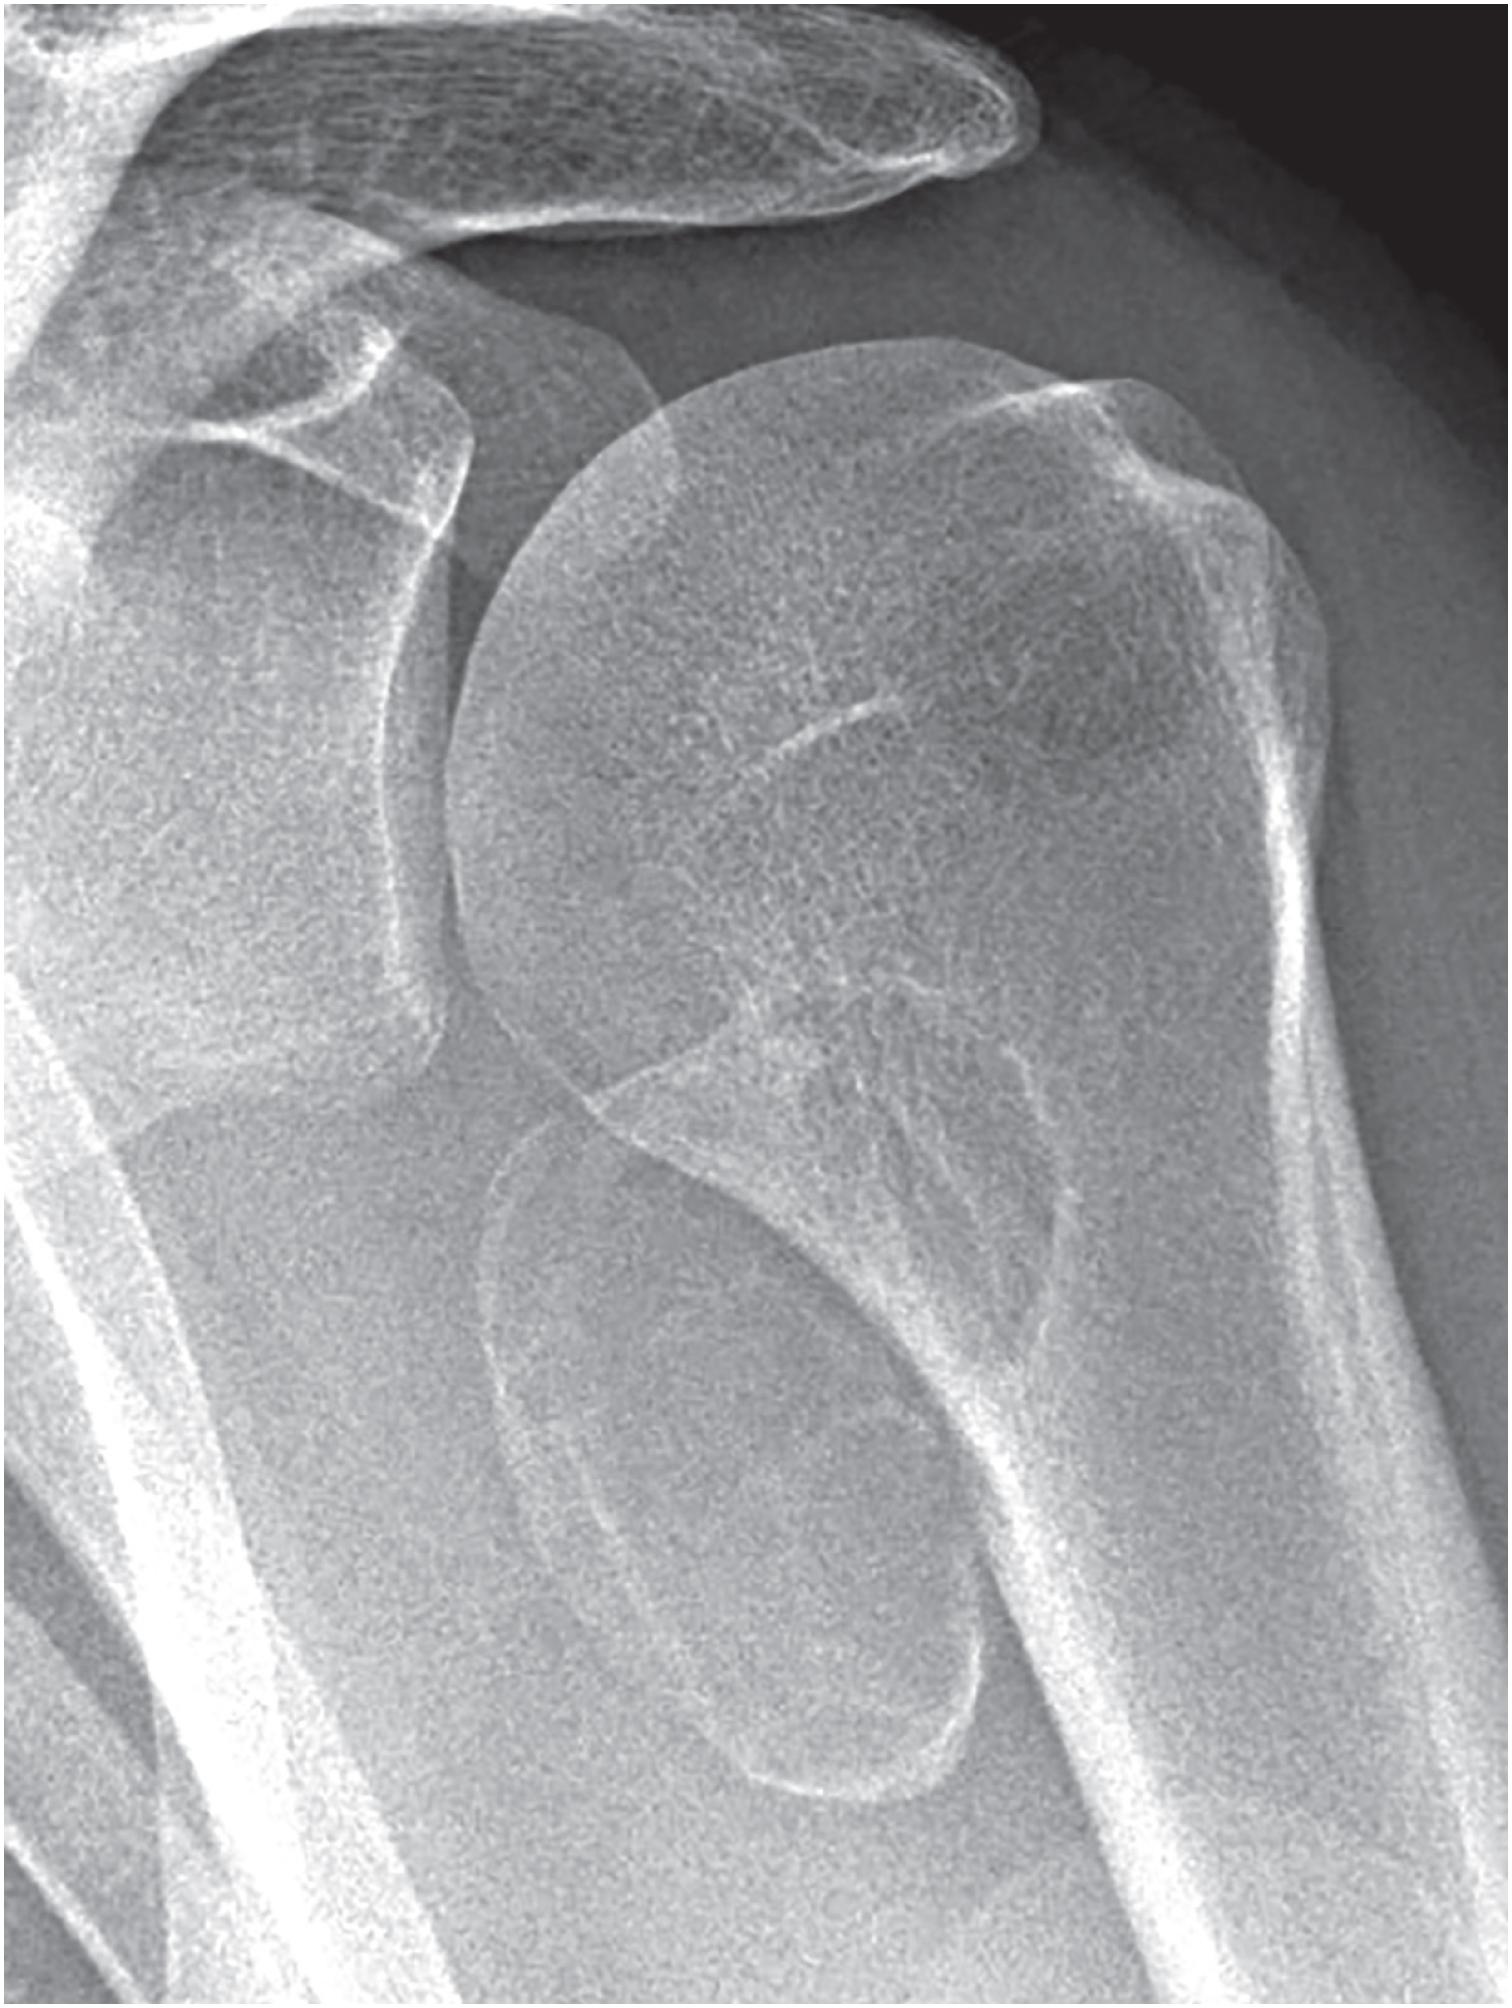 Fig. 17.23, Plan radiograph of a periosteal chondroma shows a pedunculated mass on the surface of the proximal humerus with a well-defined, sclerotic margin.